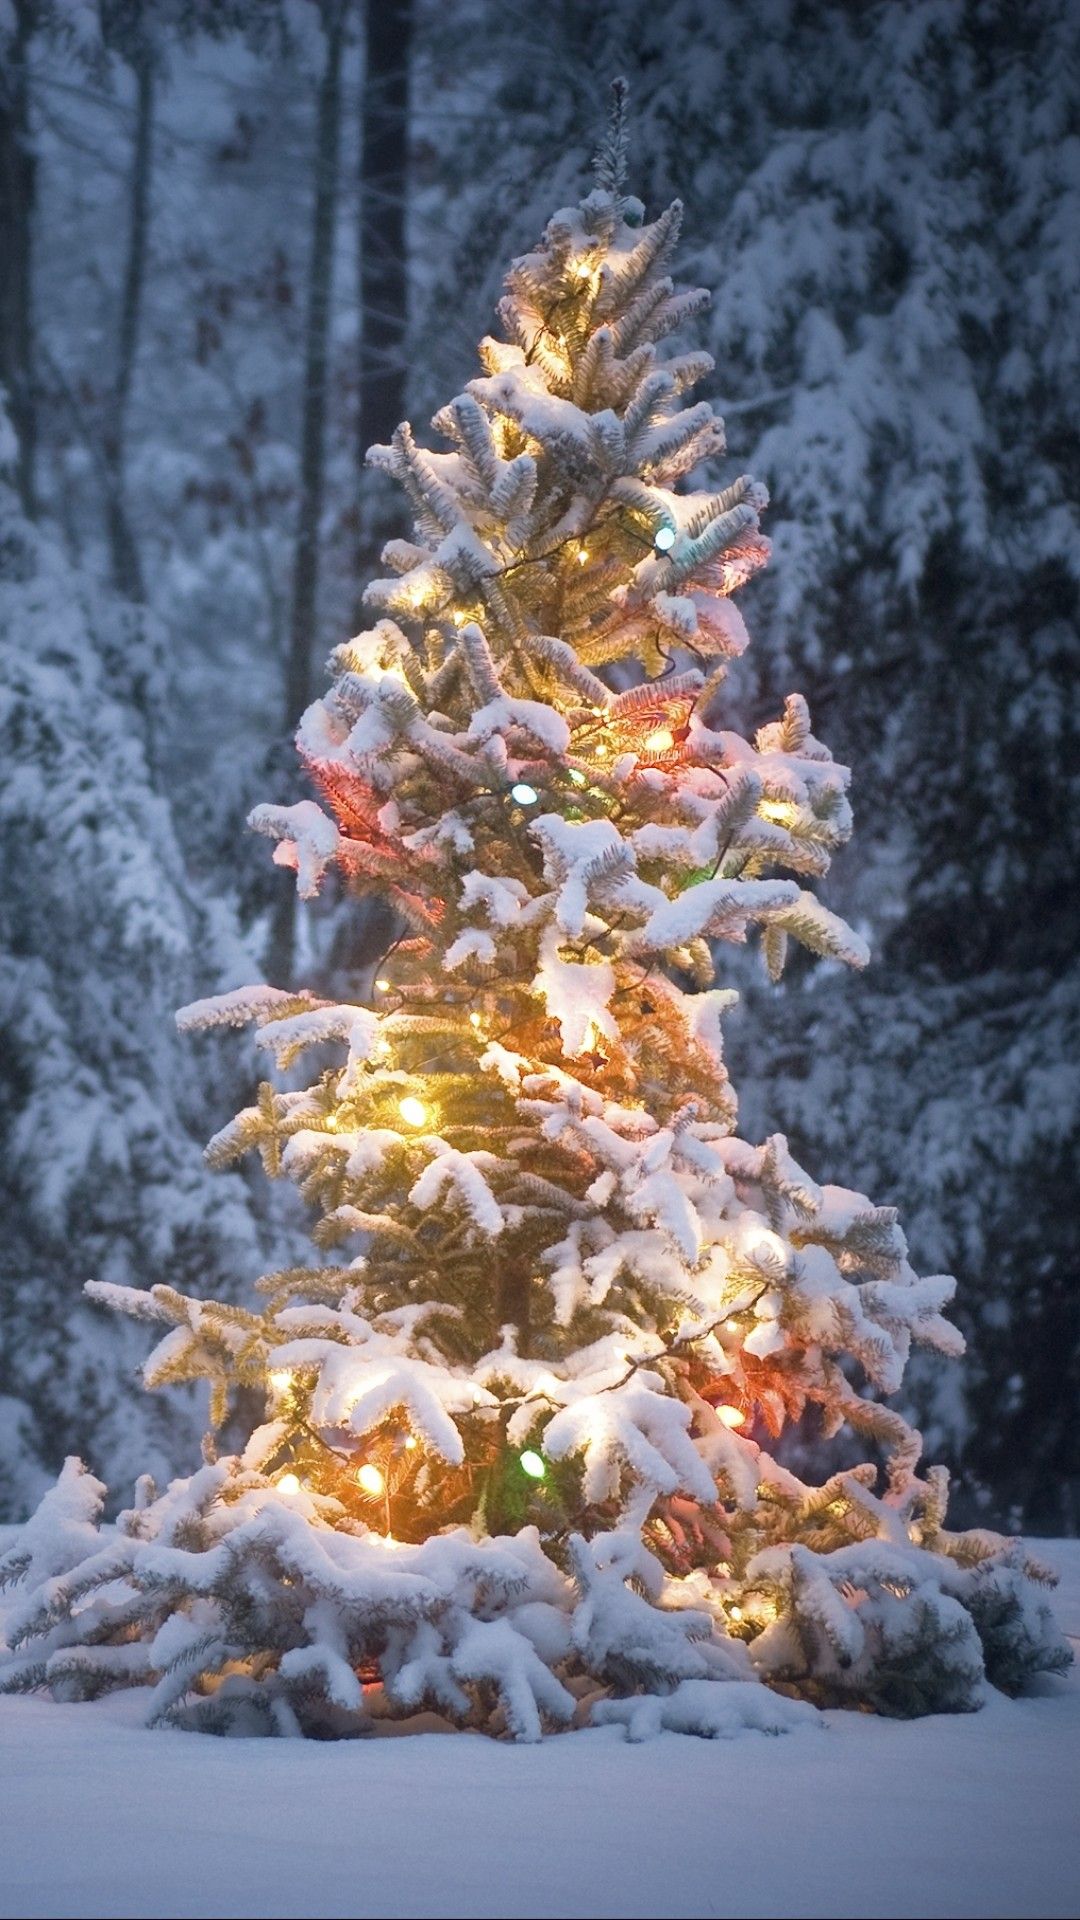 A christmas tree is lit up in the snow - Christmas lights